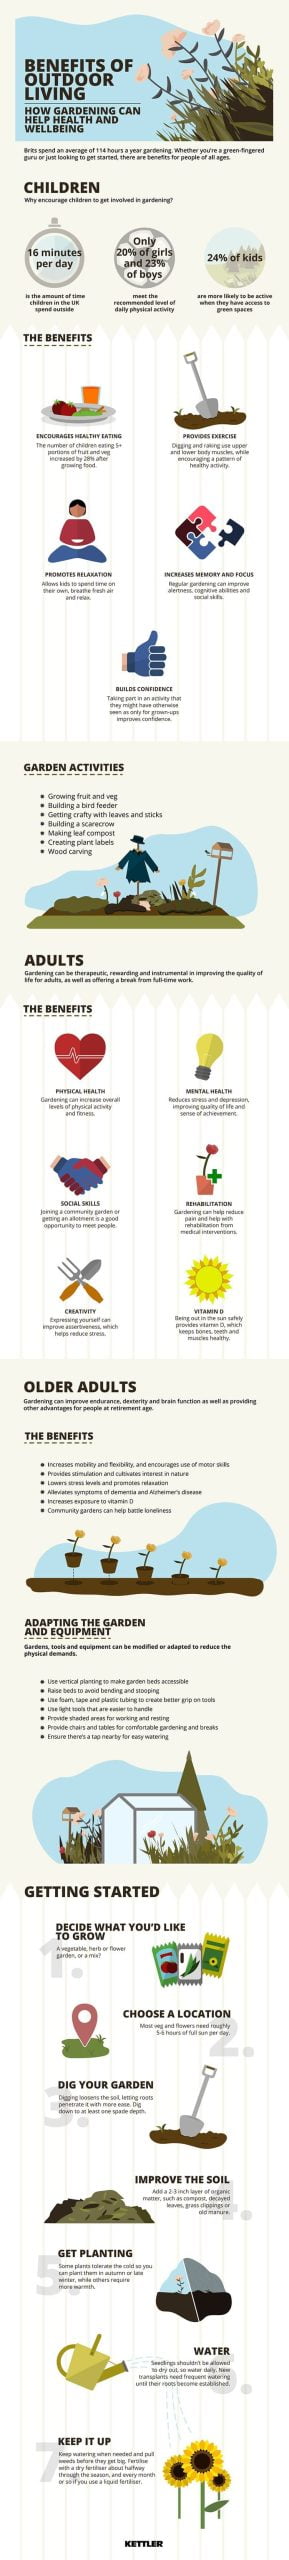 benefits of outdoor living infographic